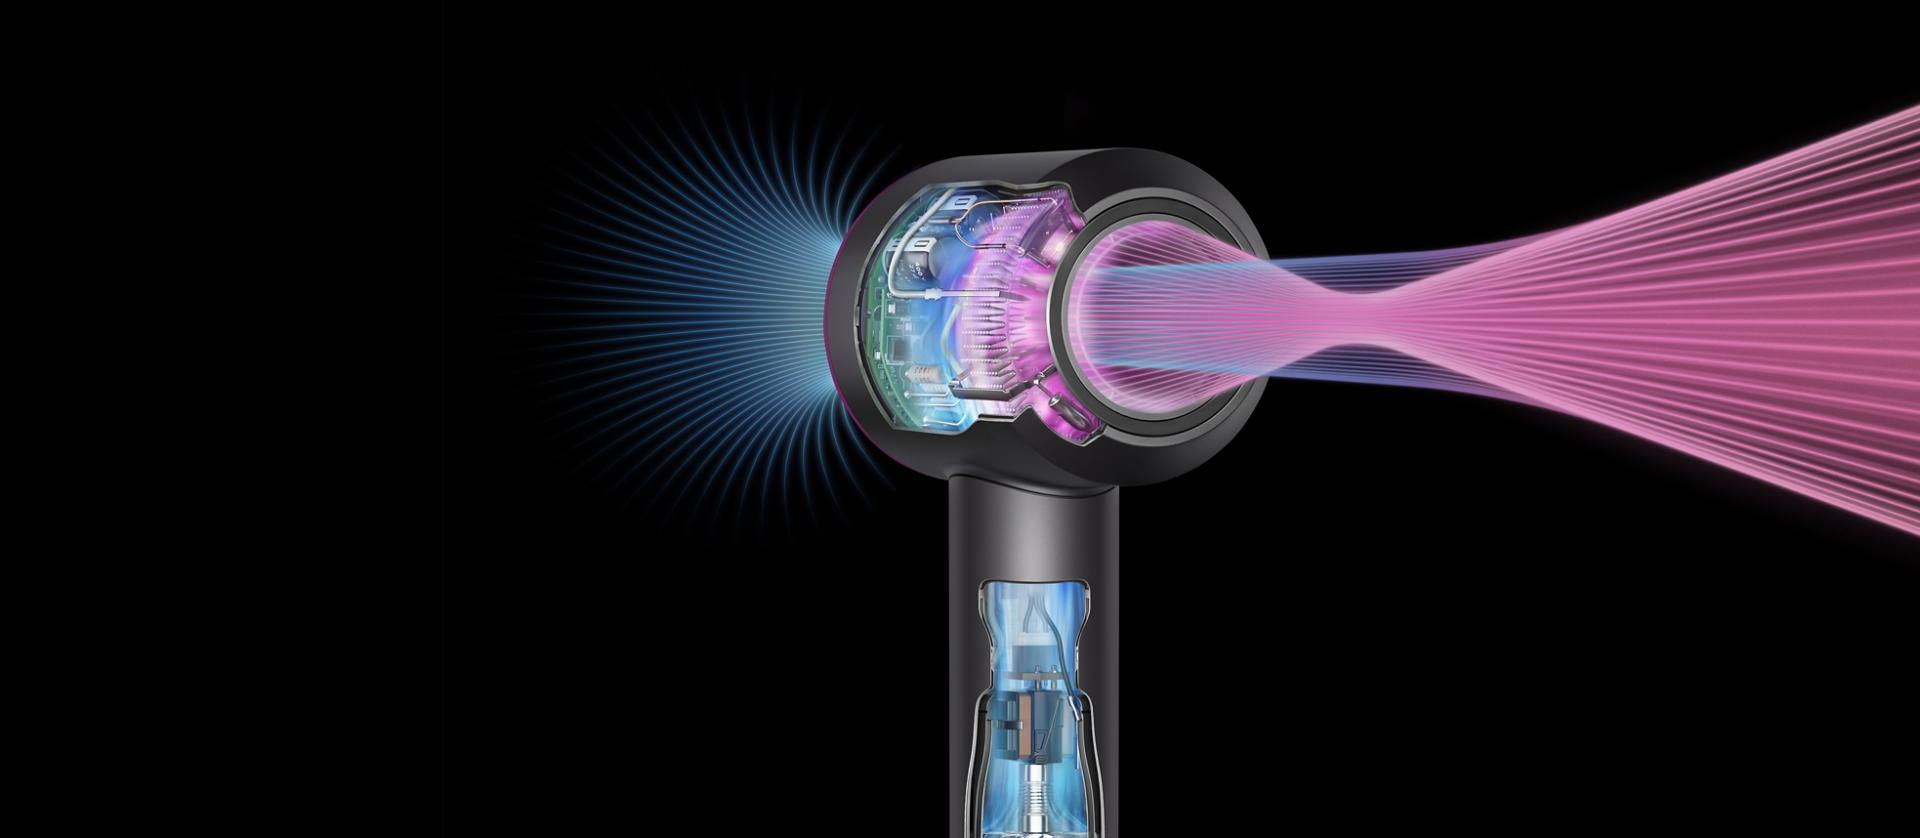 Illustration of theinner working of the dyson supersonic